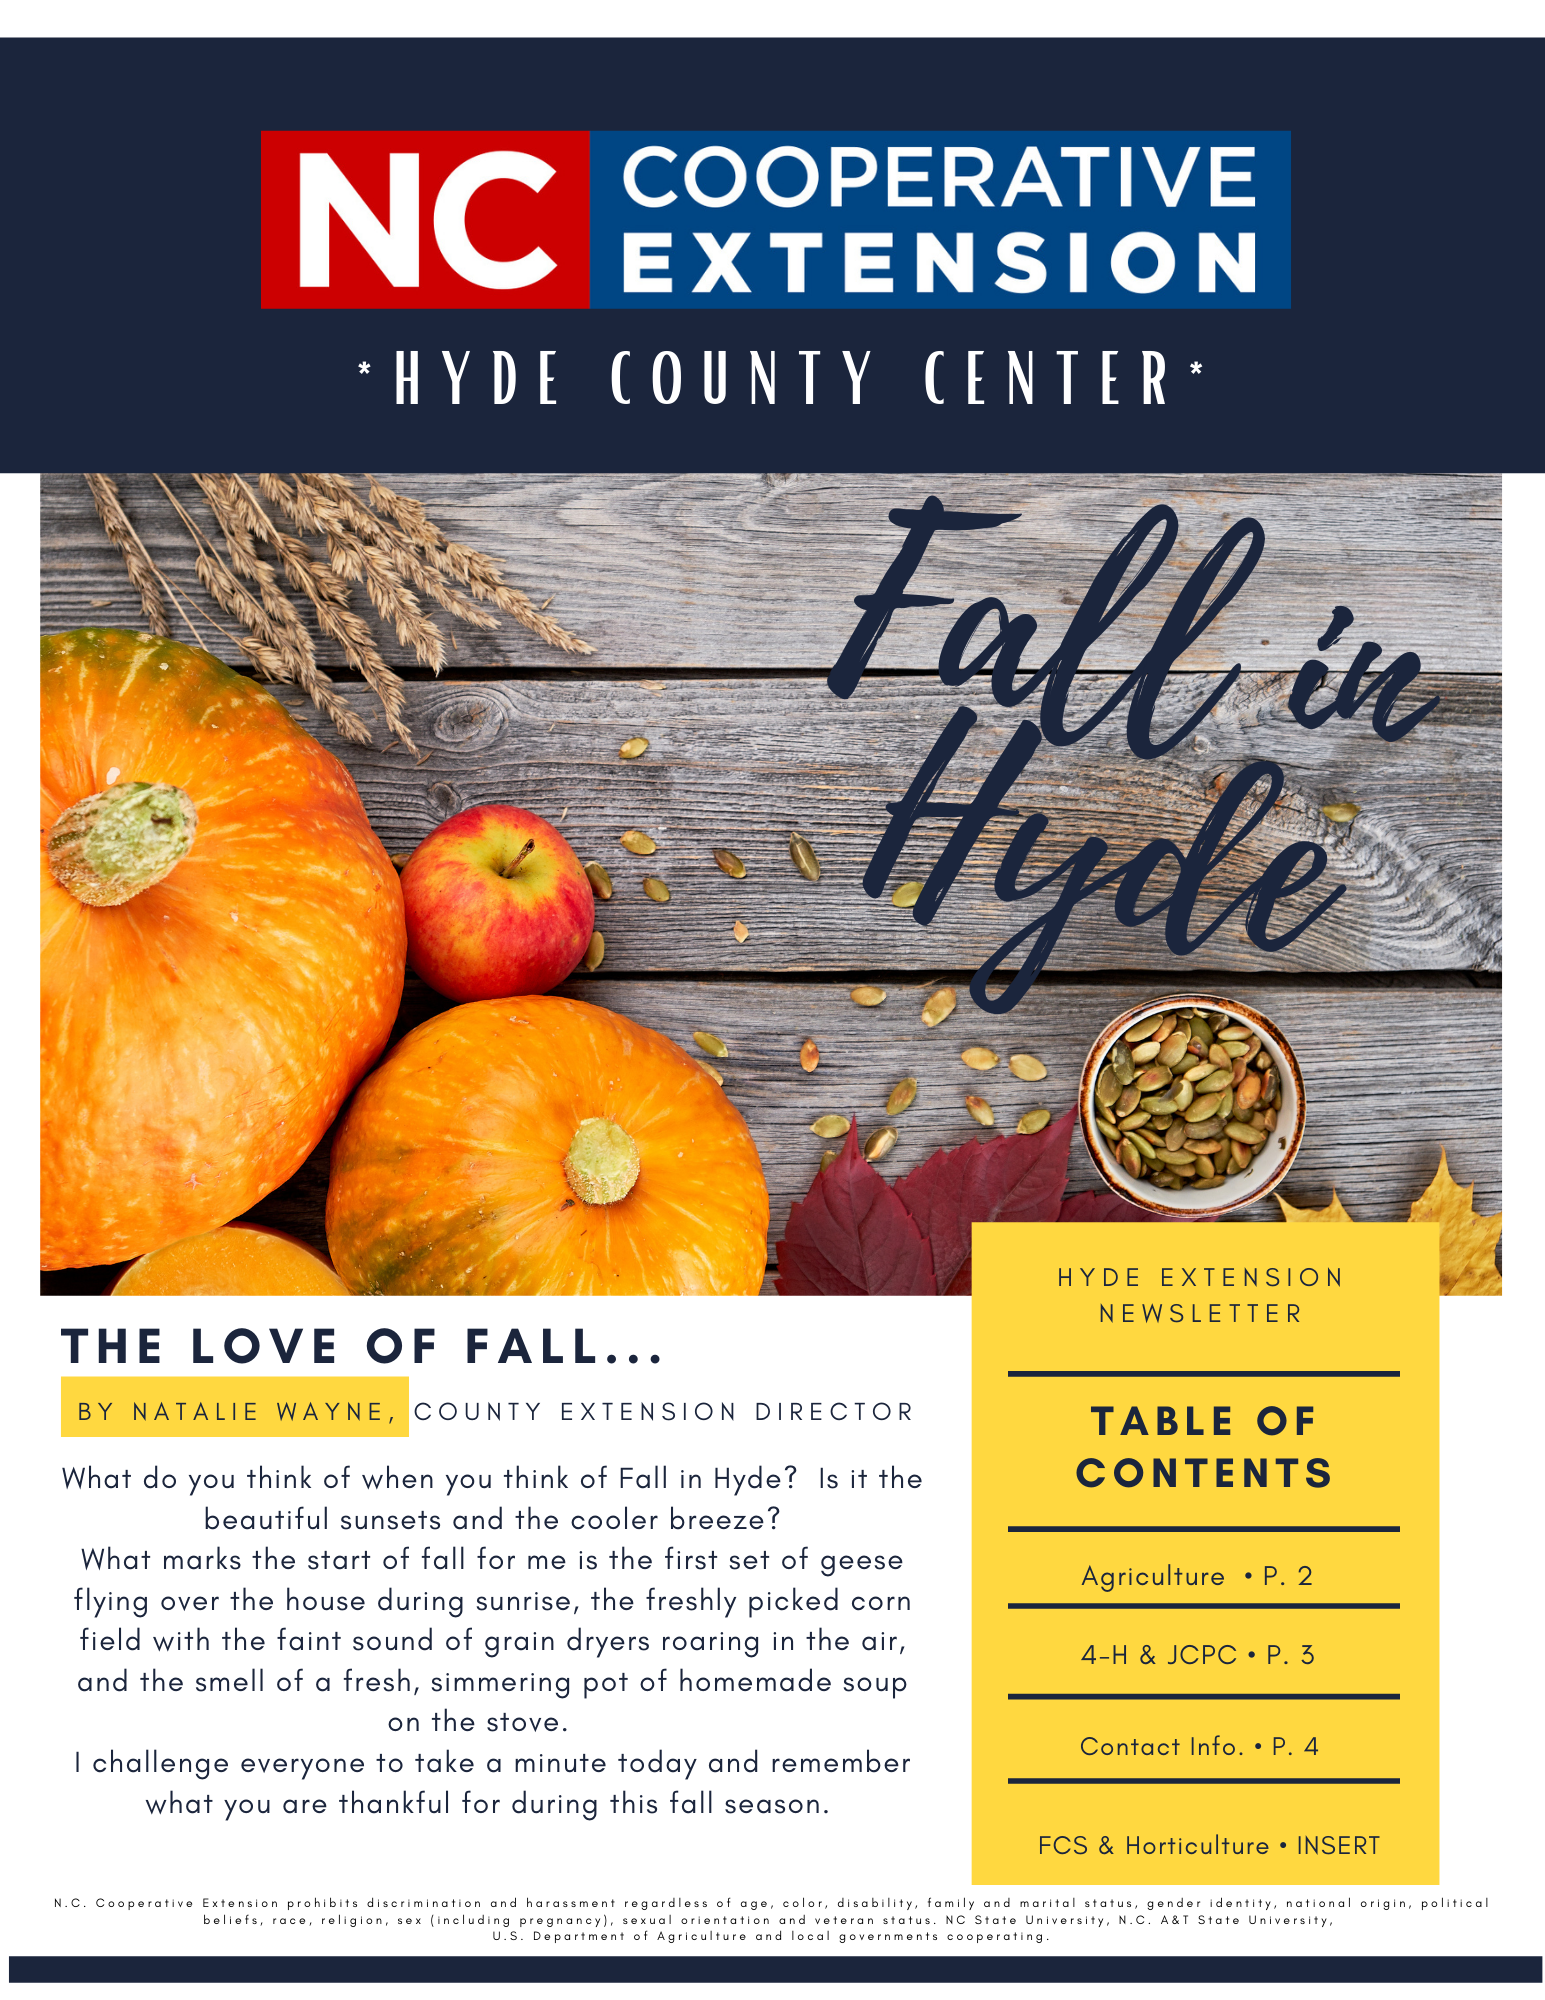 Hyde County Center fall newsletter page 1